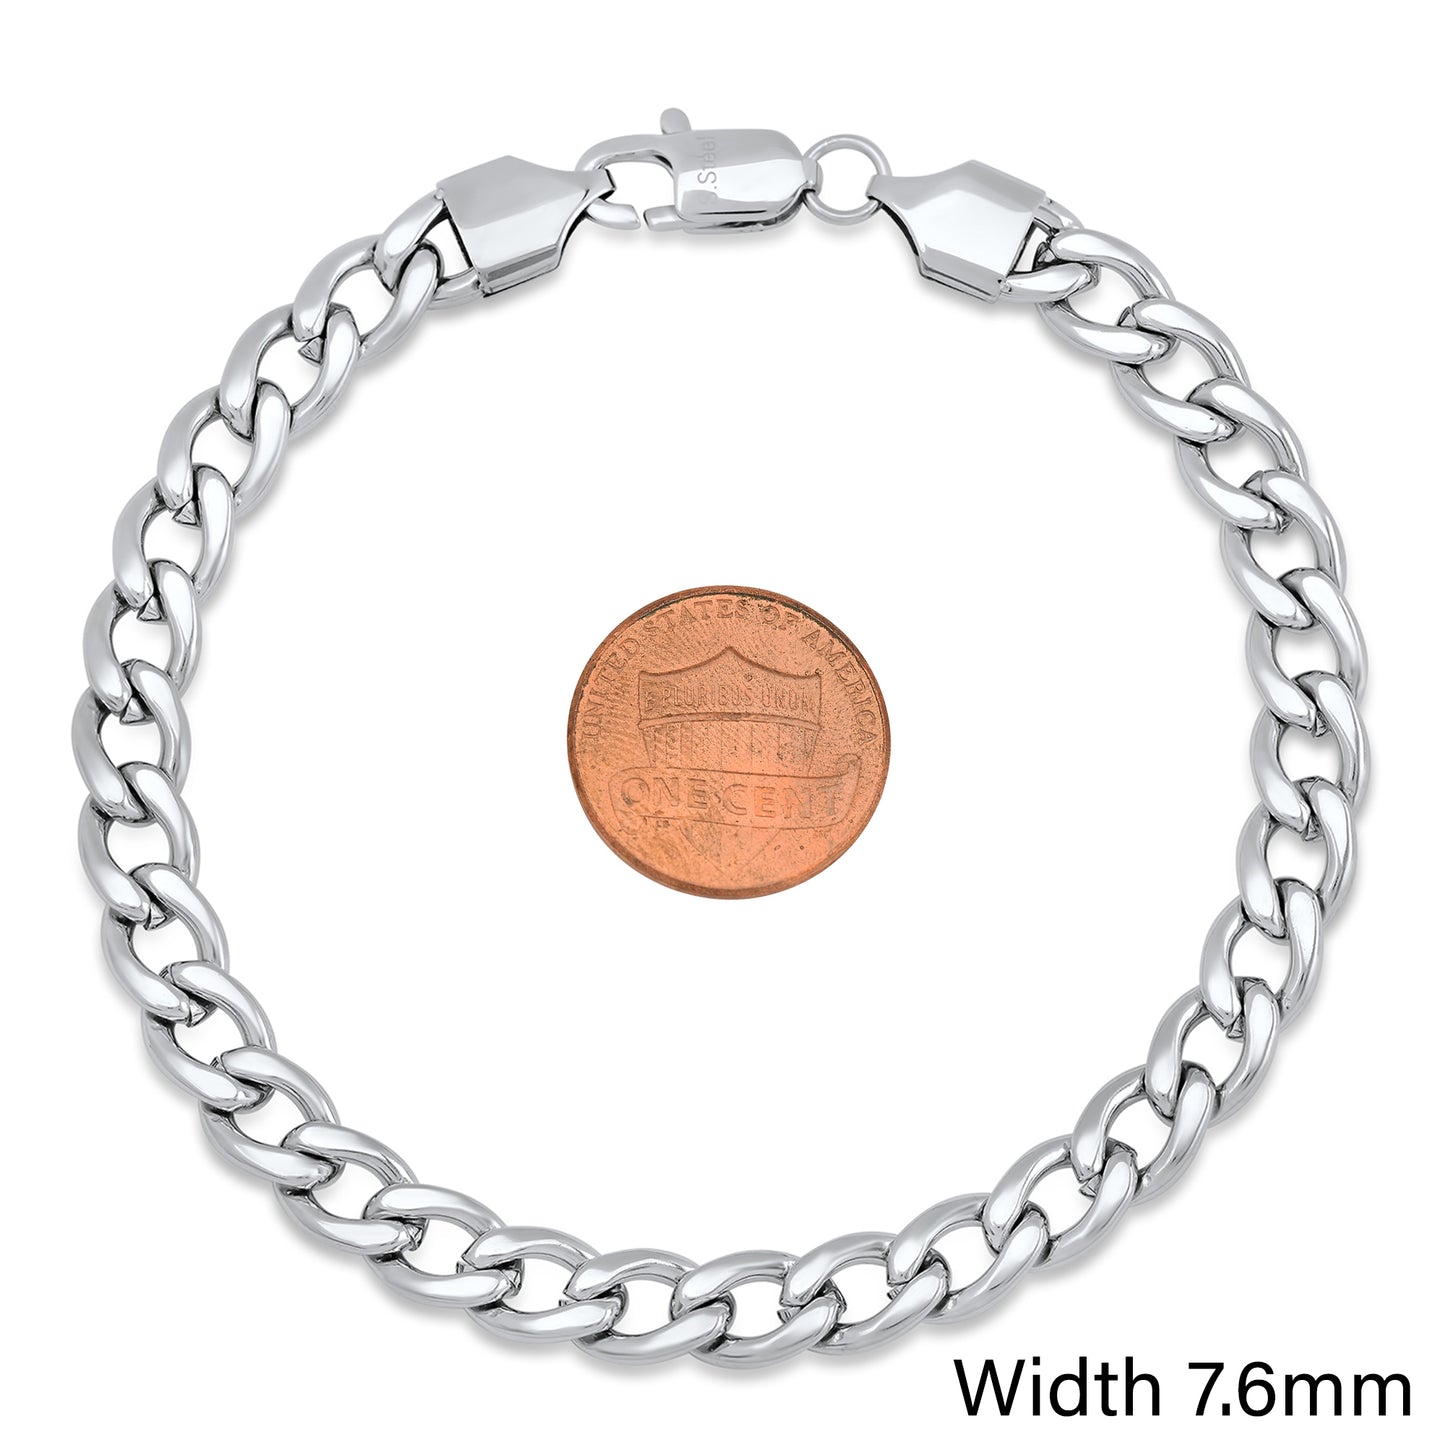 Men's 7.6mm High-Polished Stainless Steel Flat Curb Chain Bracelet (SKU: ST-SD1006B)